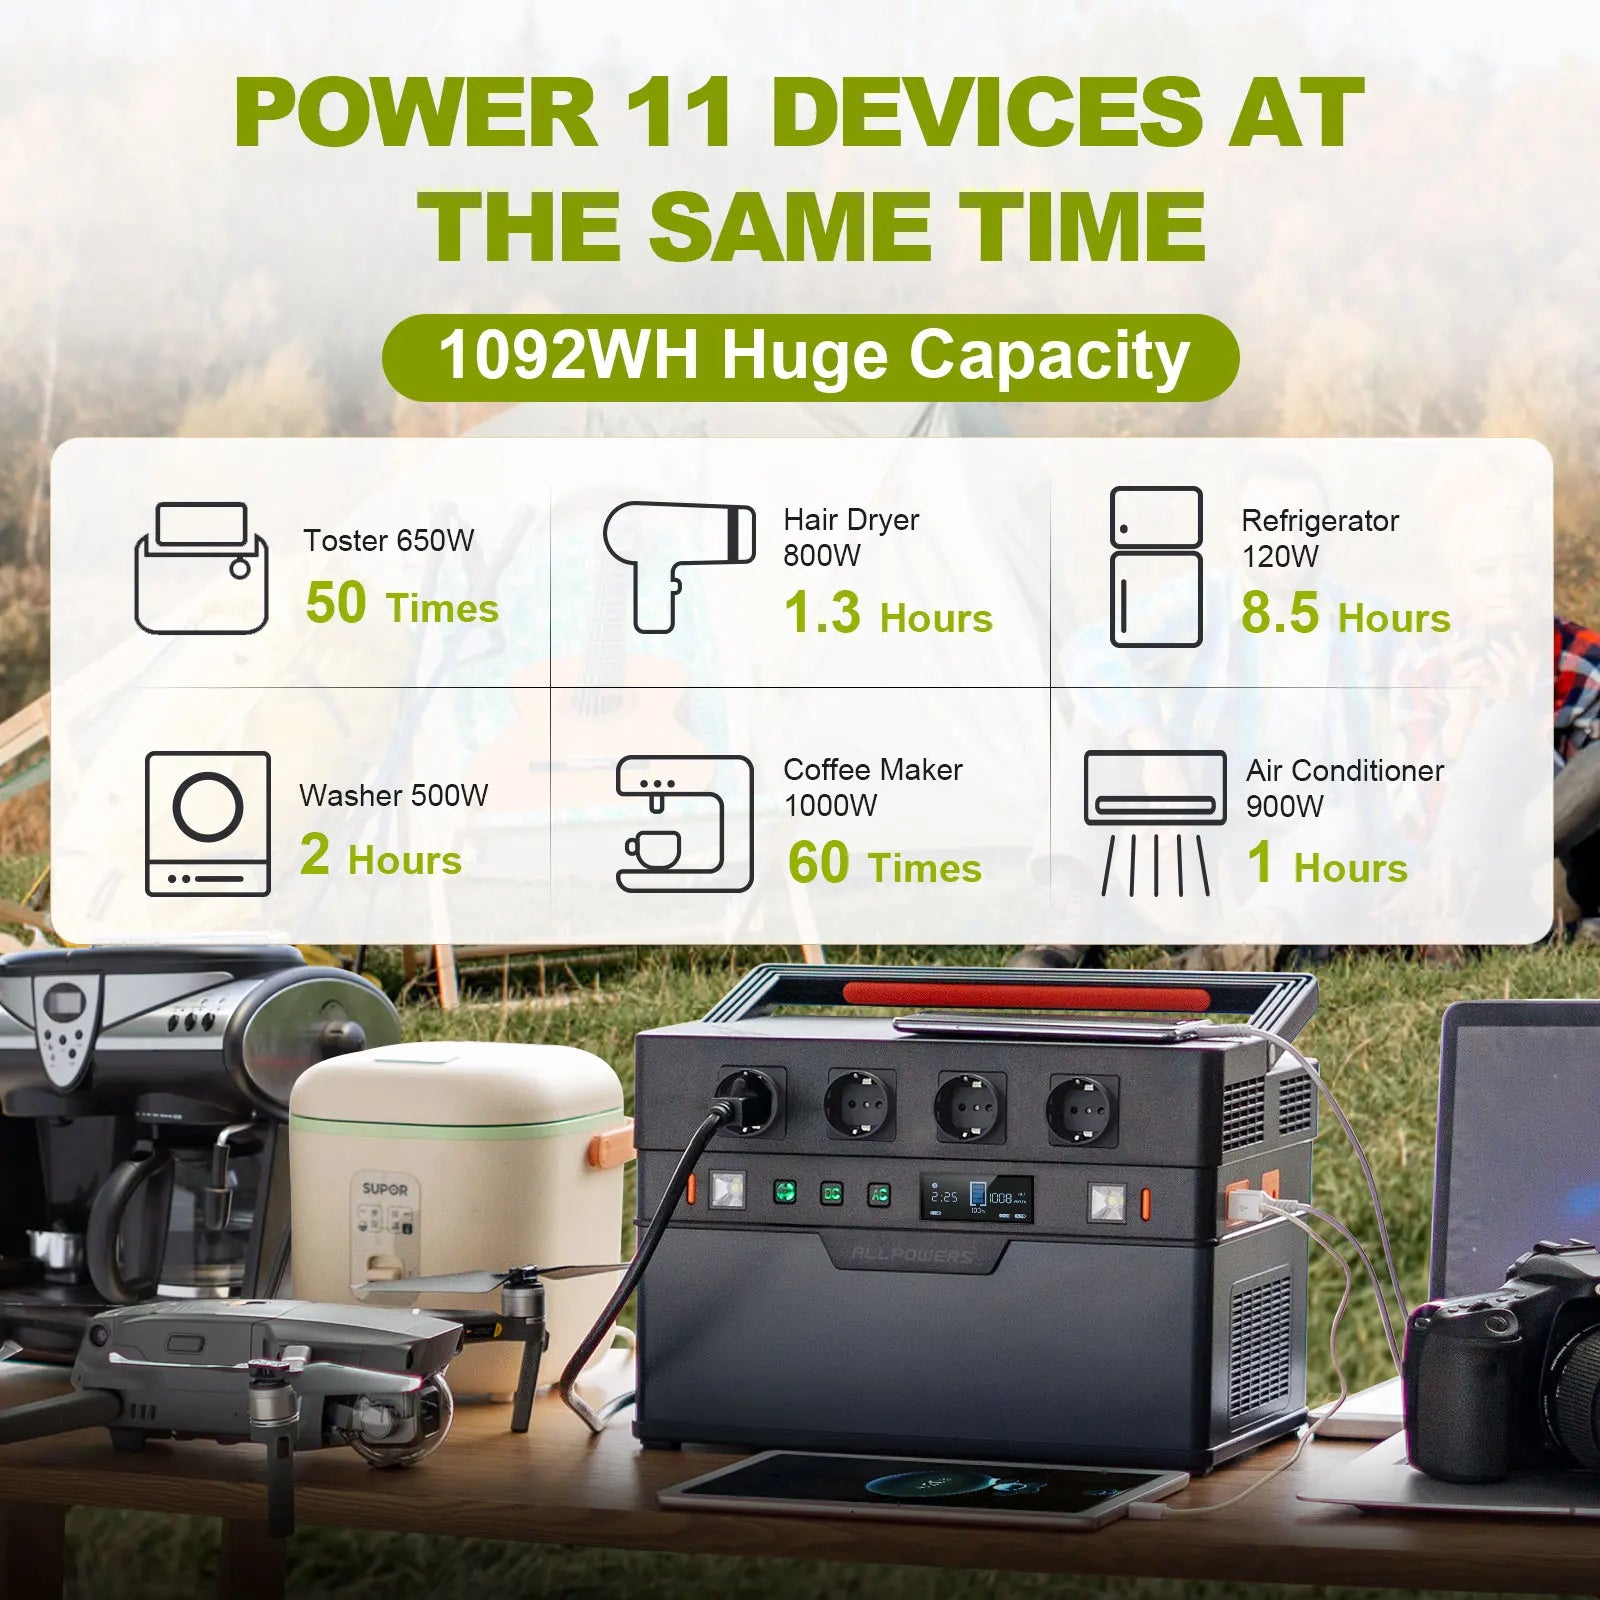 Portable generator powers up to 11 devices simultaneously with massive 1092Wh capacity.